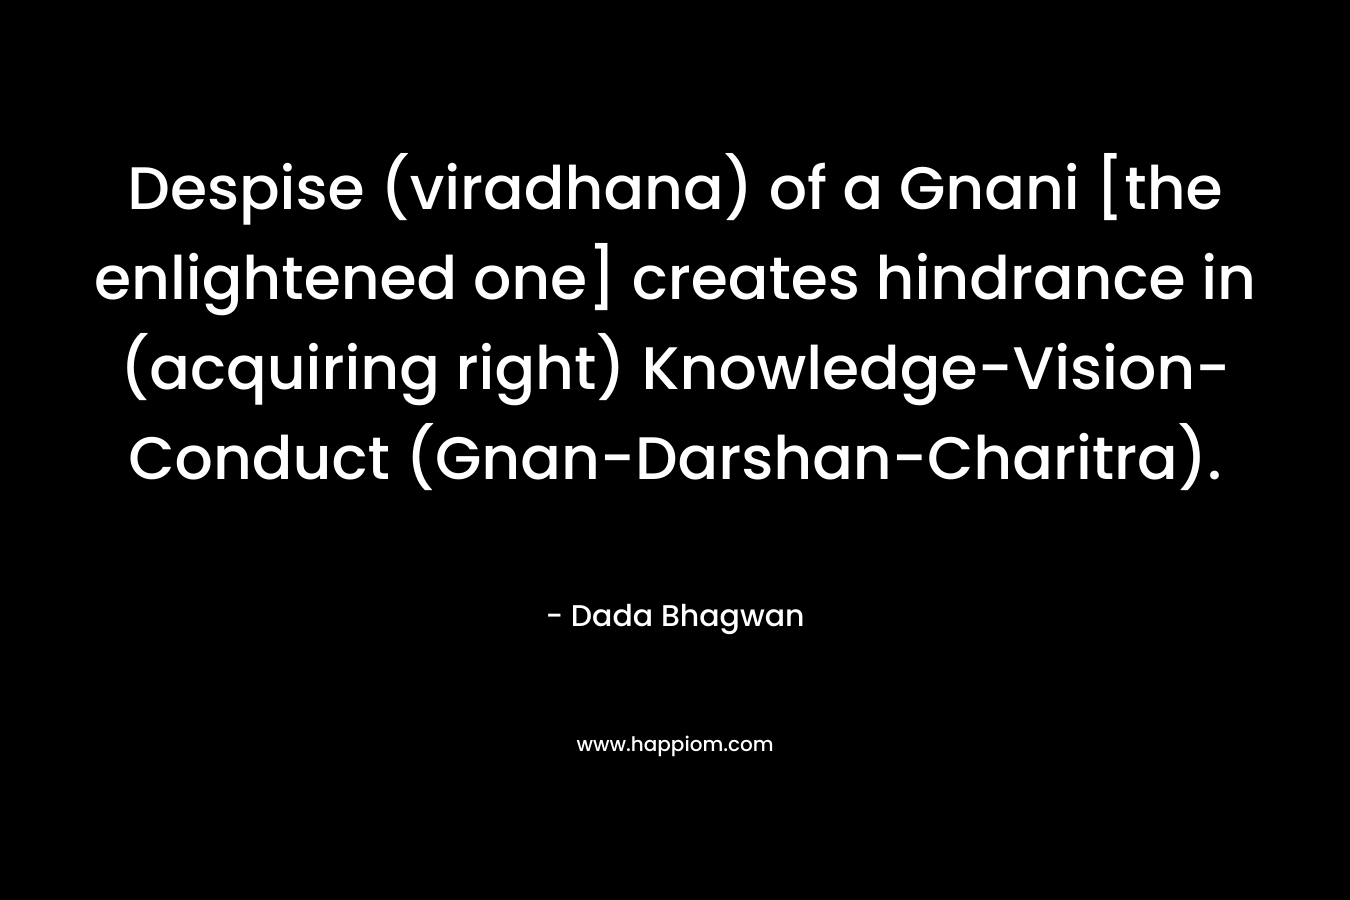 Despise (viradhana) of a Gnani [the enlightened one] creates hindrance in (acquiring right) Knowledge-Vision-Conduct (Gnan-Darshan-Charitra). – Dada Bhagwan